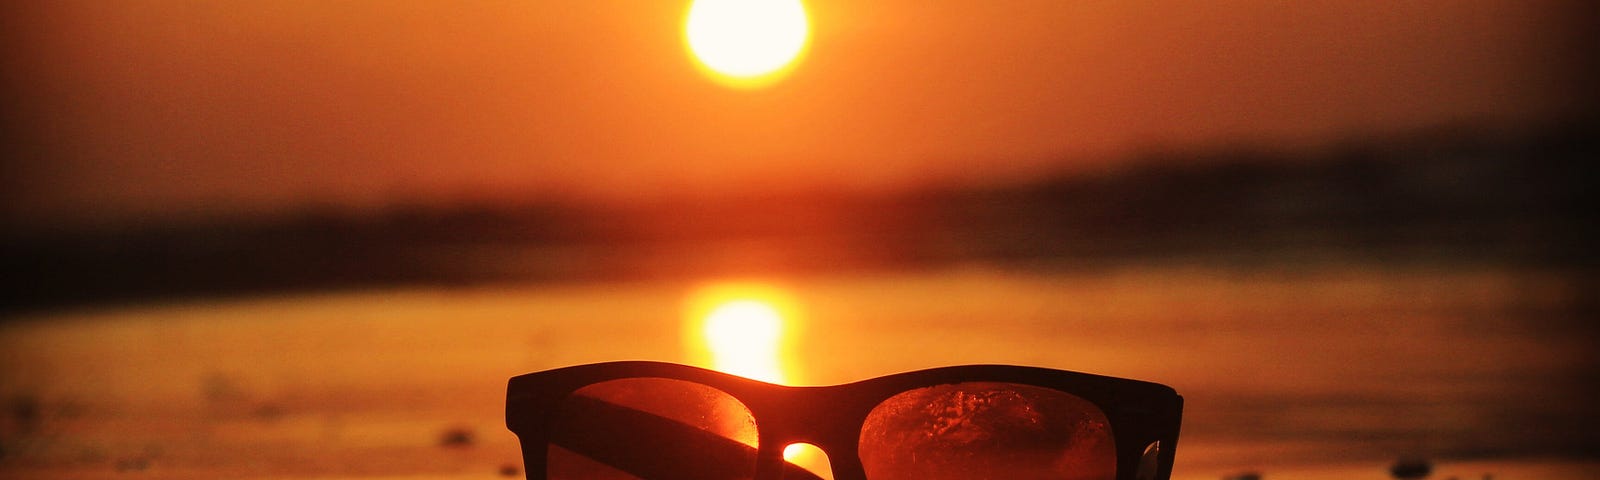 Sunglass on the beach, with the sun setting in the background